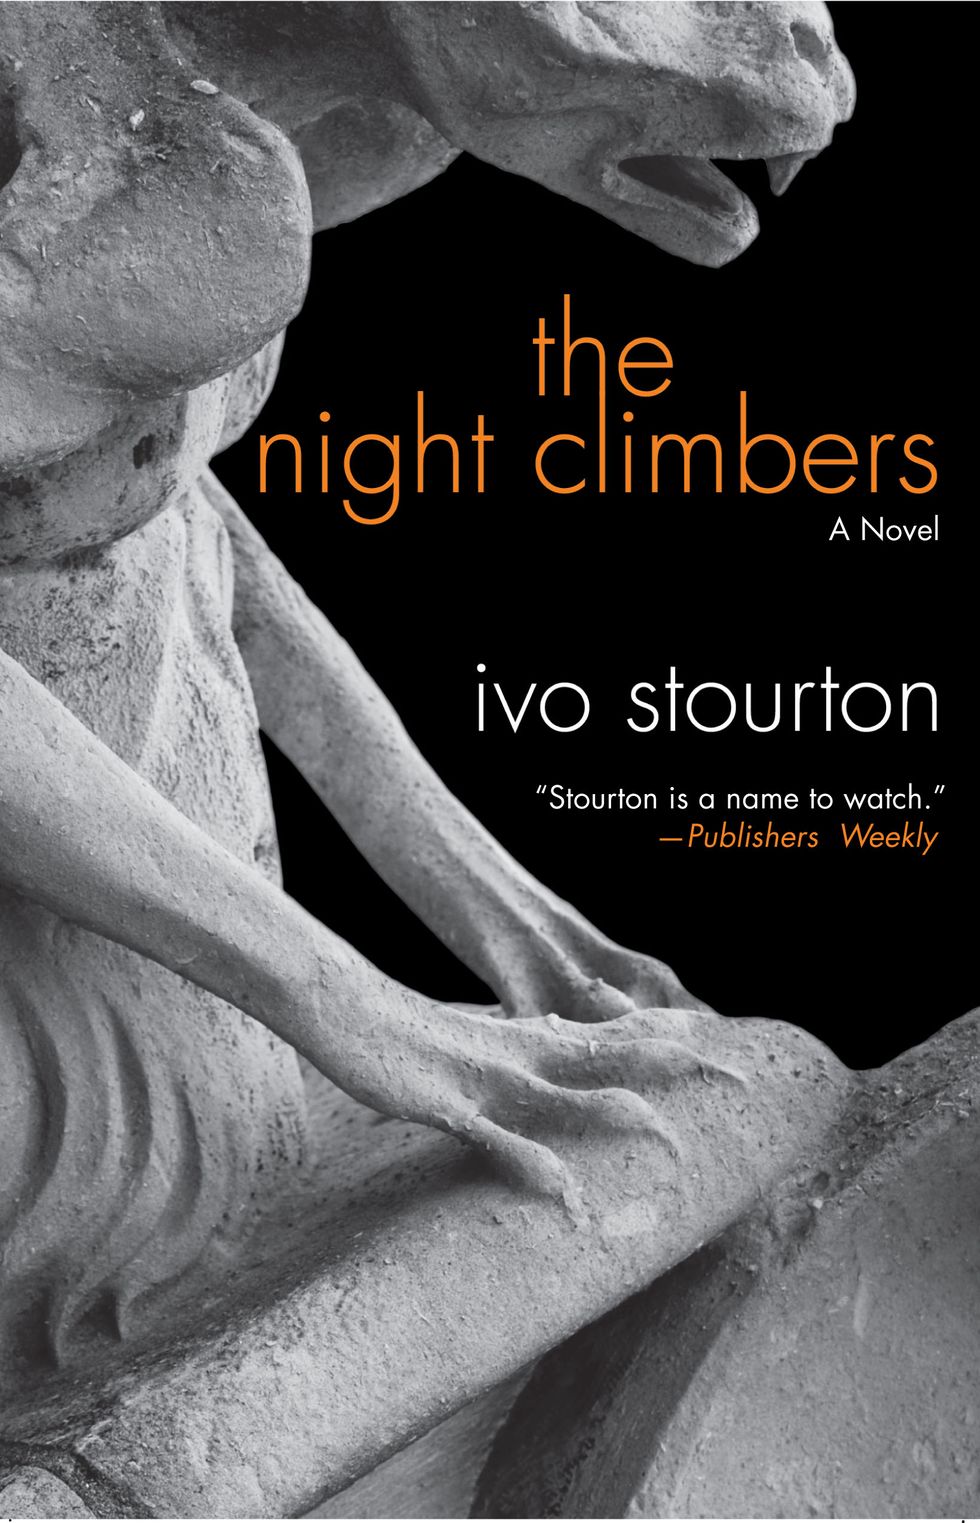 the night climbers by ivo stourton cover featuring a gargoyle on a black background